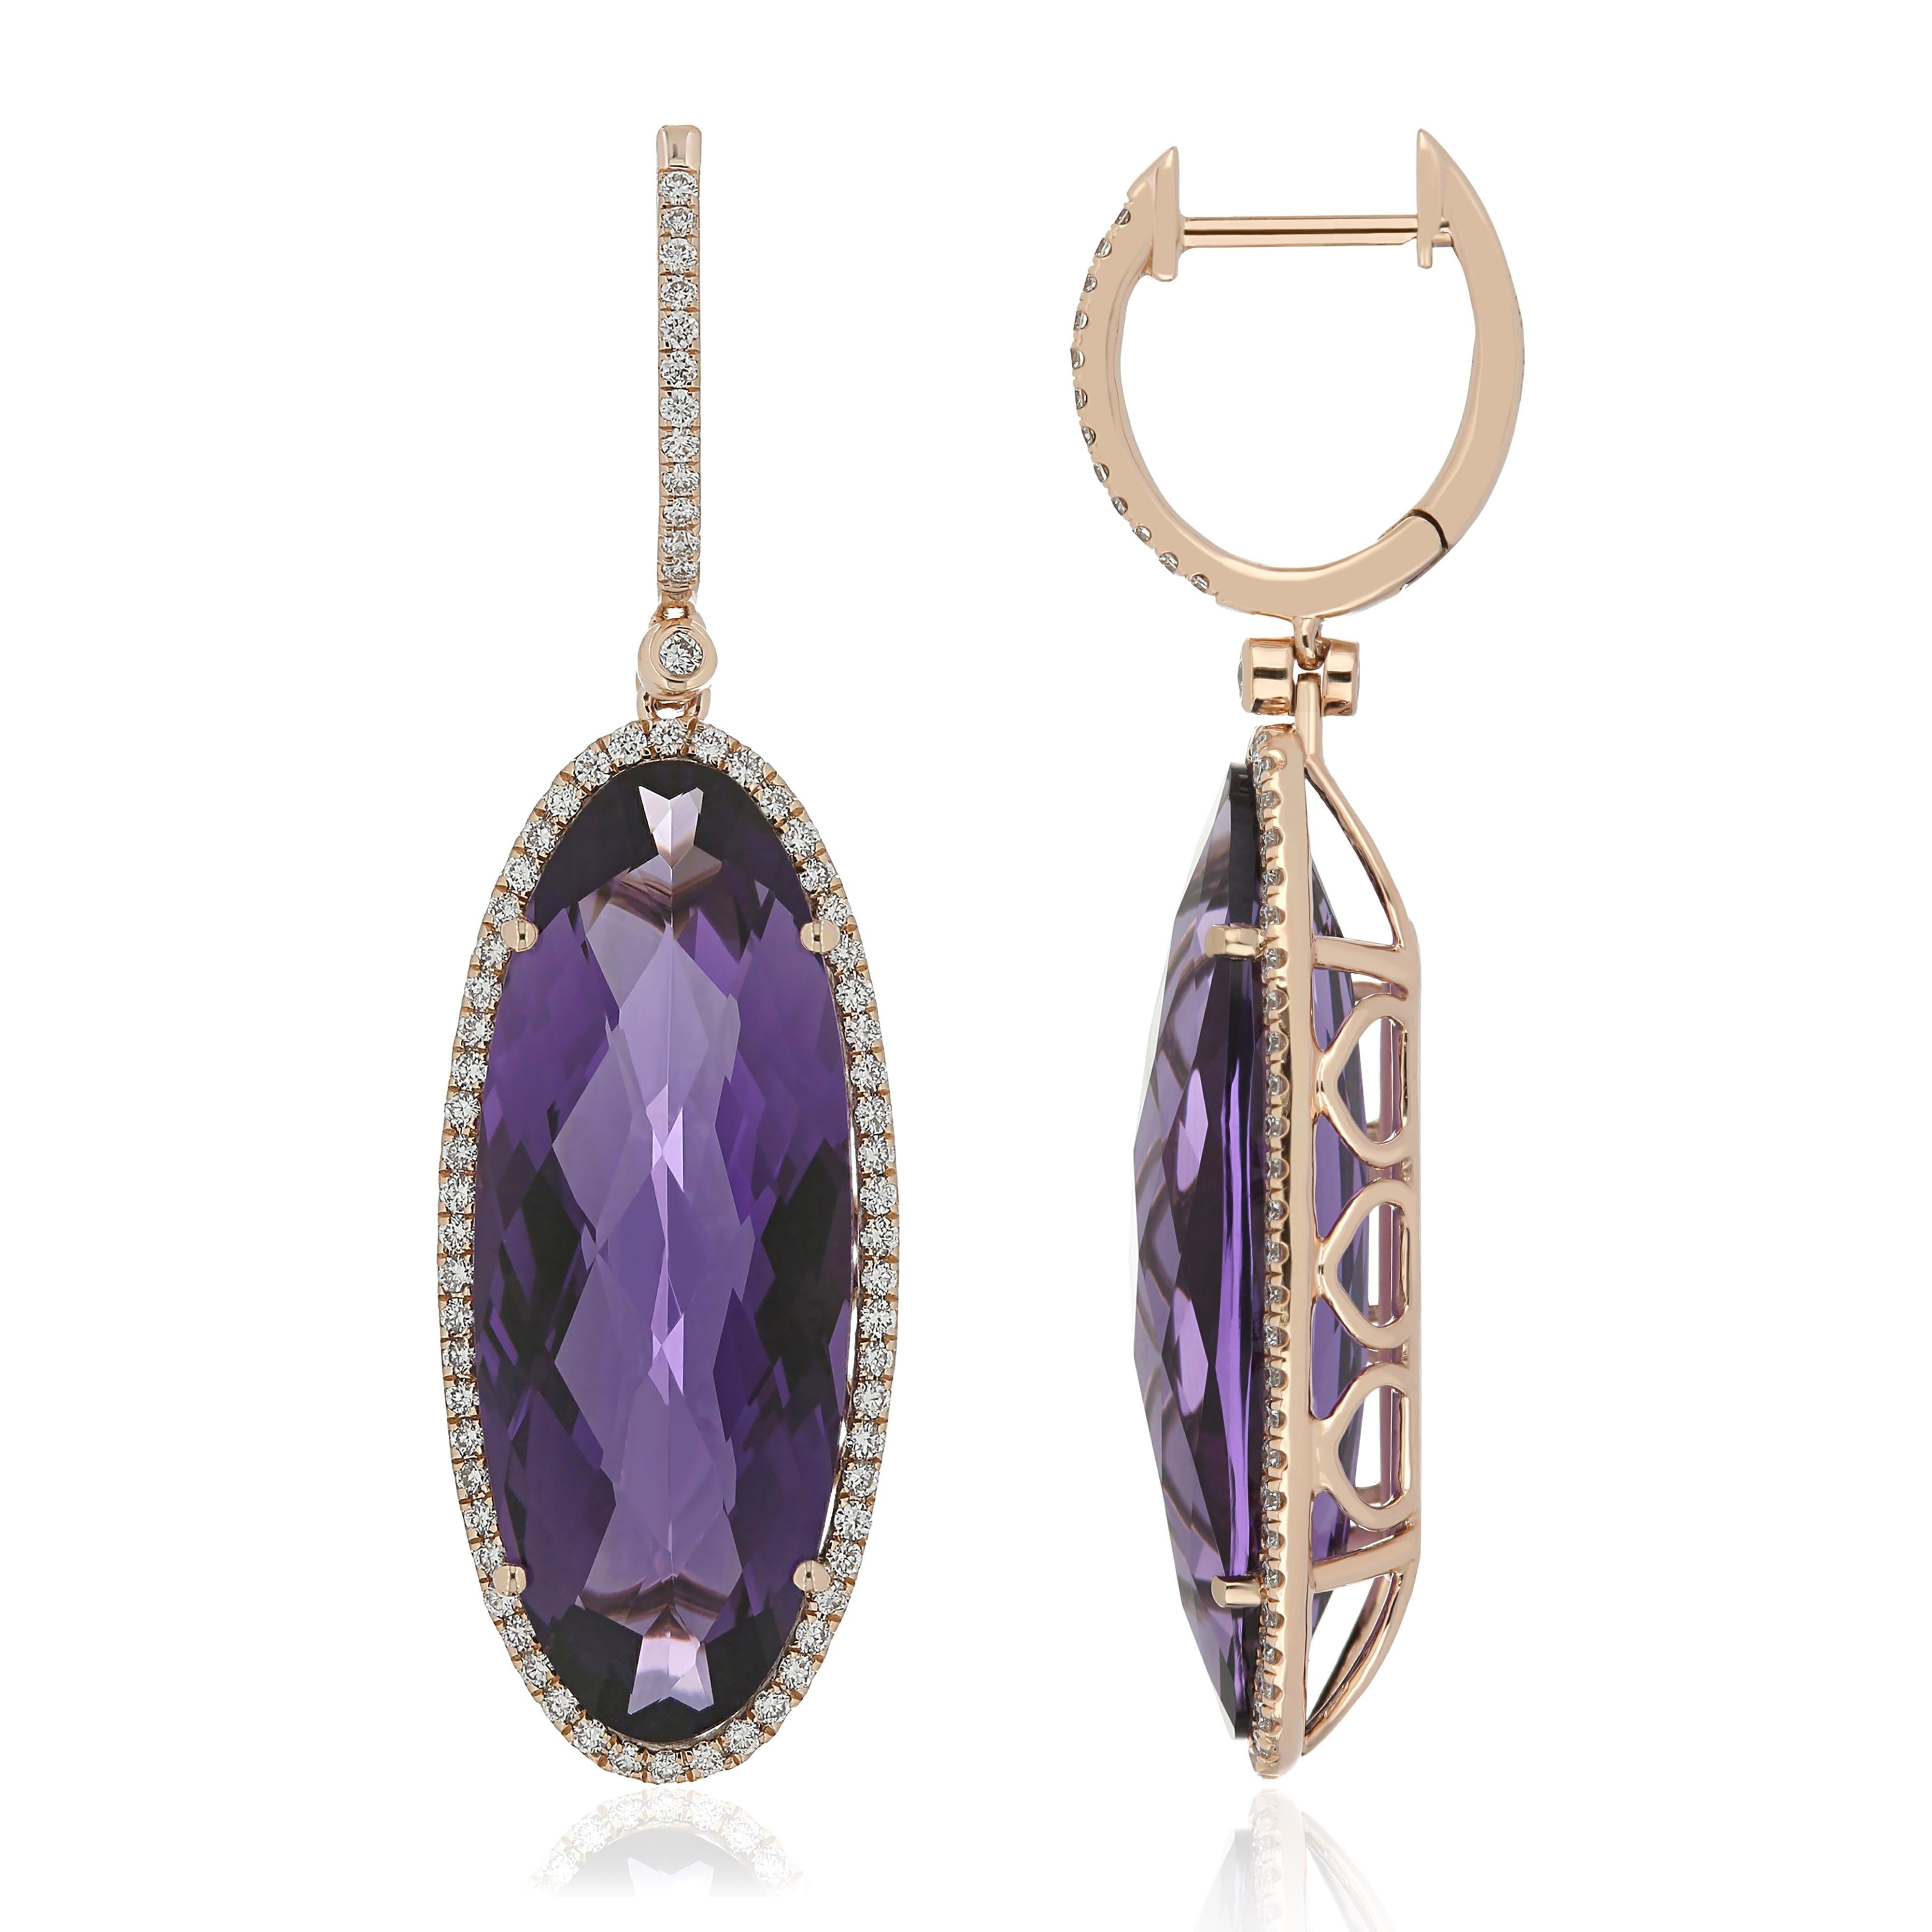 Elegant and exquisitely detailed 14 Karat Rose Gold Dangle Earring, center set with 18.80Cts .Oval Shape Amethyst, and micro pave set Diamonds, weighing approx. 0.57 Cts Beautifully Hand crafted in 14 Karat Rose Gold.

Stone Detail:
Amethyst: